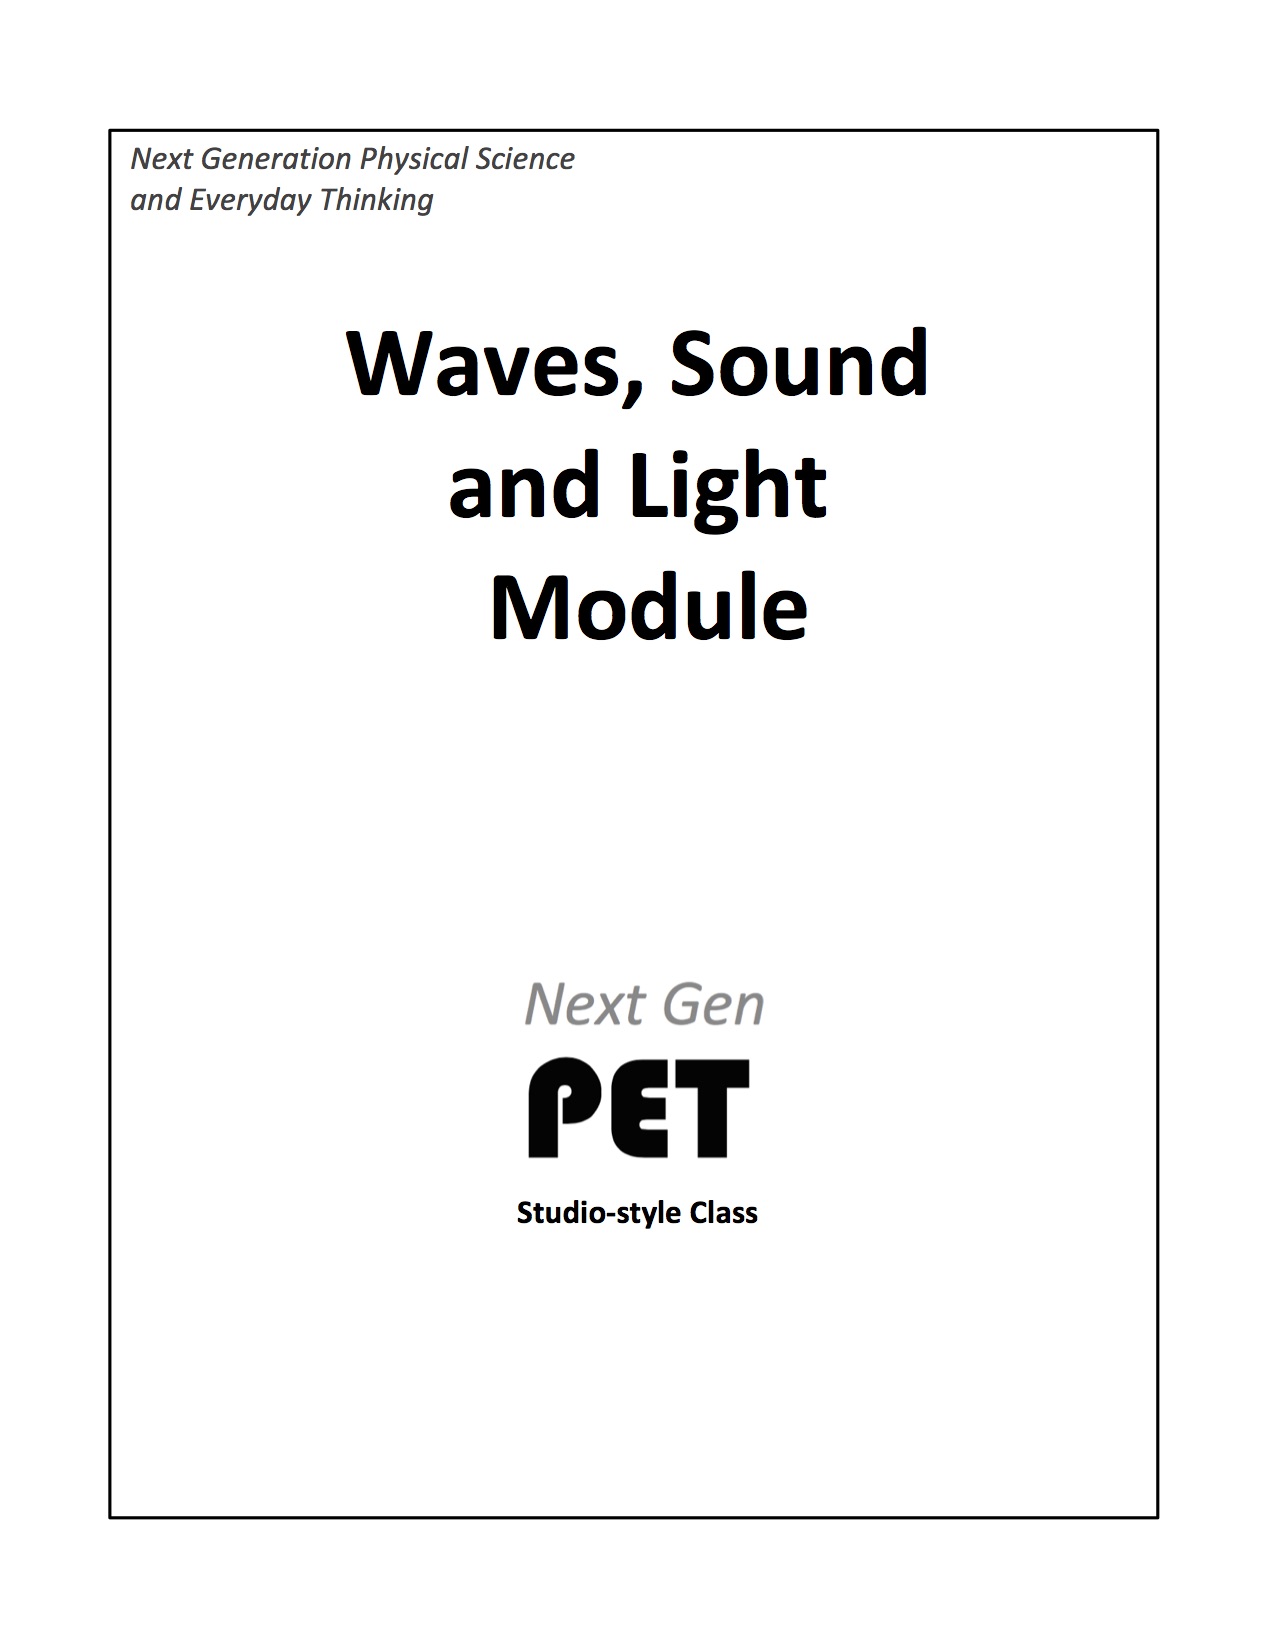 Module WSL: Waves, Sound and Light